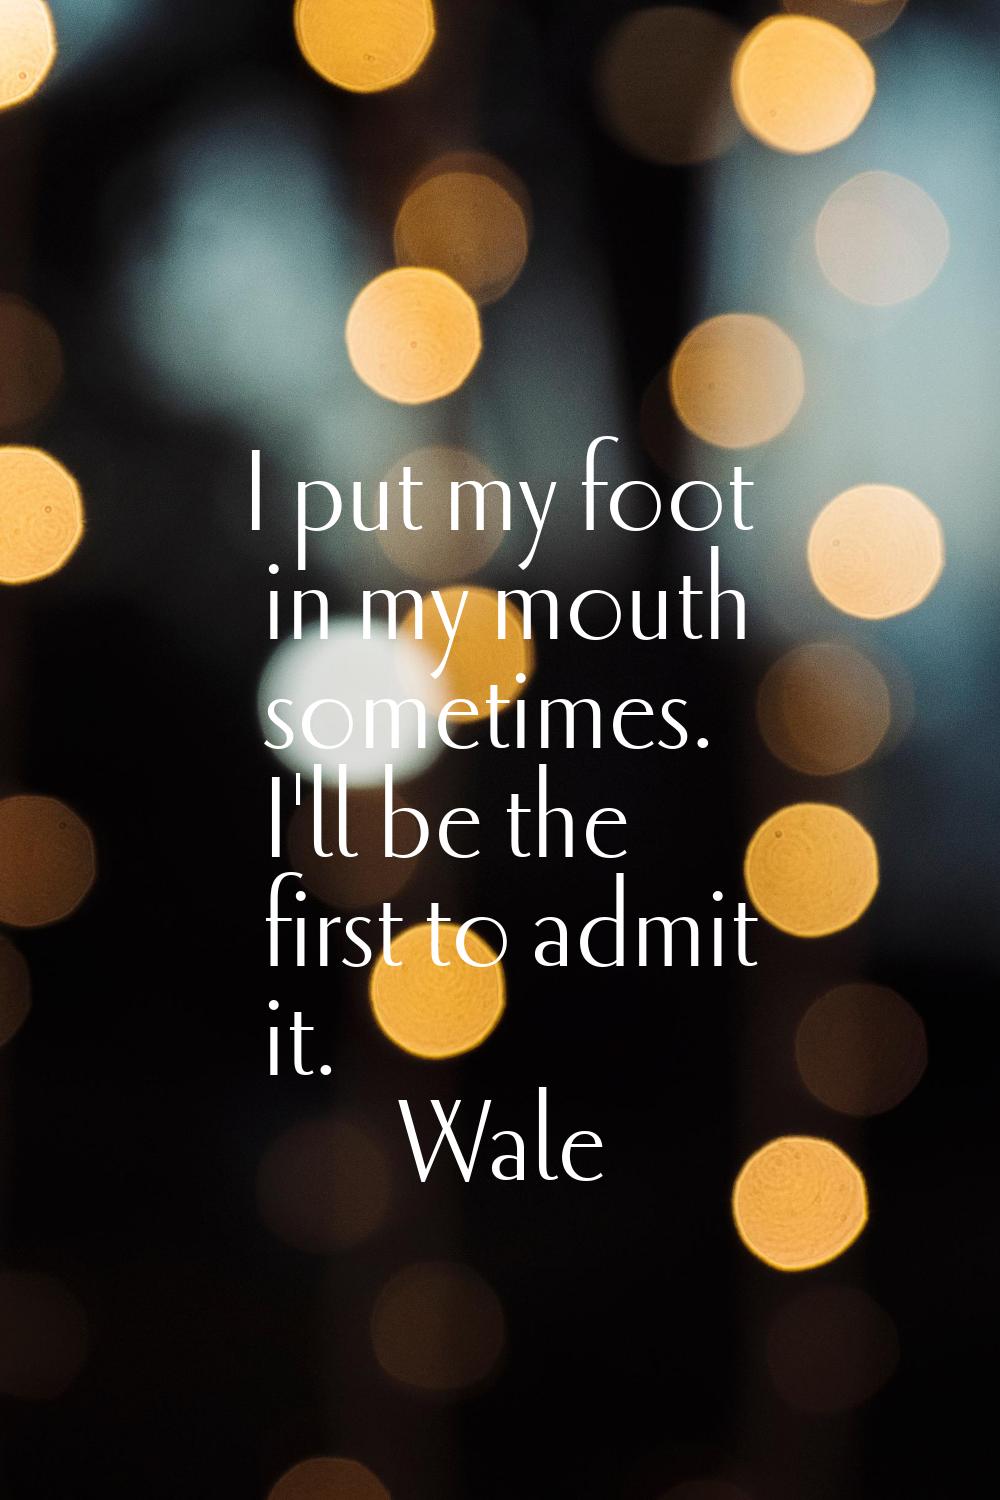 I put my foot in my mouth sometimes. I'll be the first to admit it.